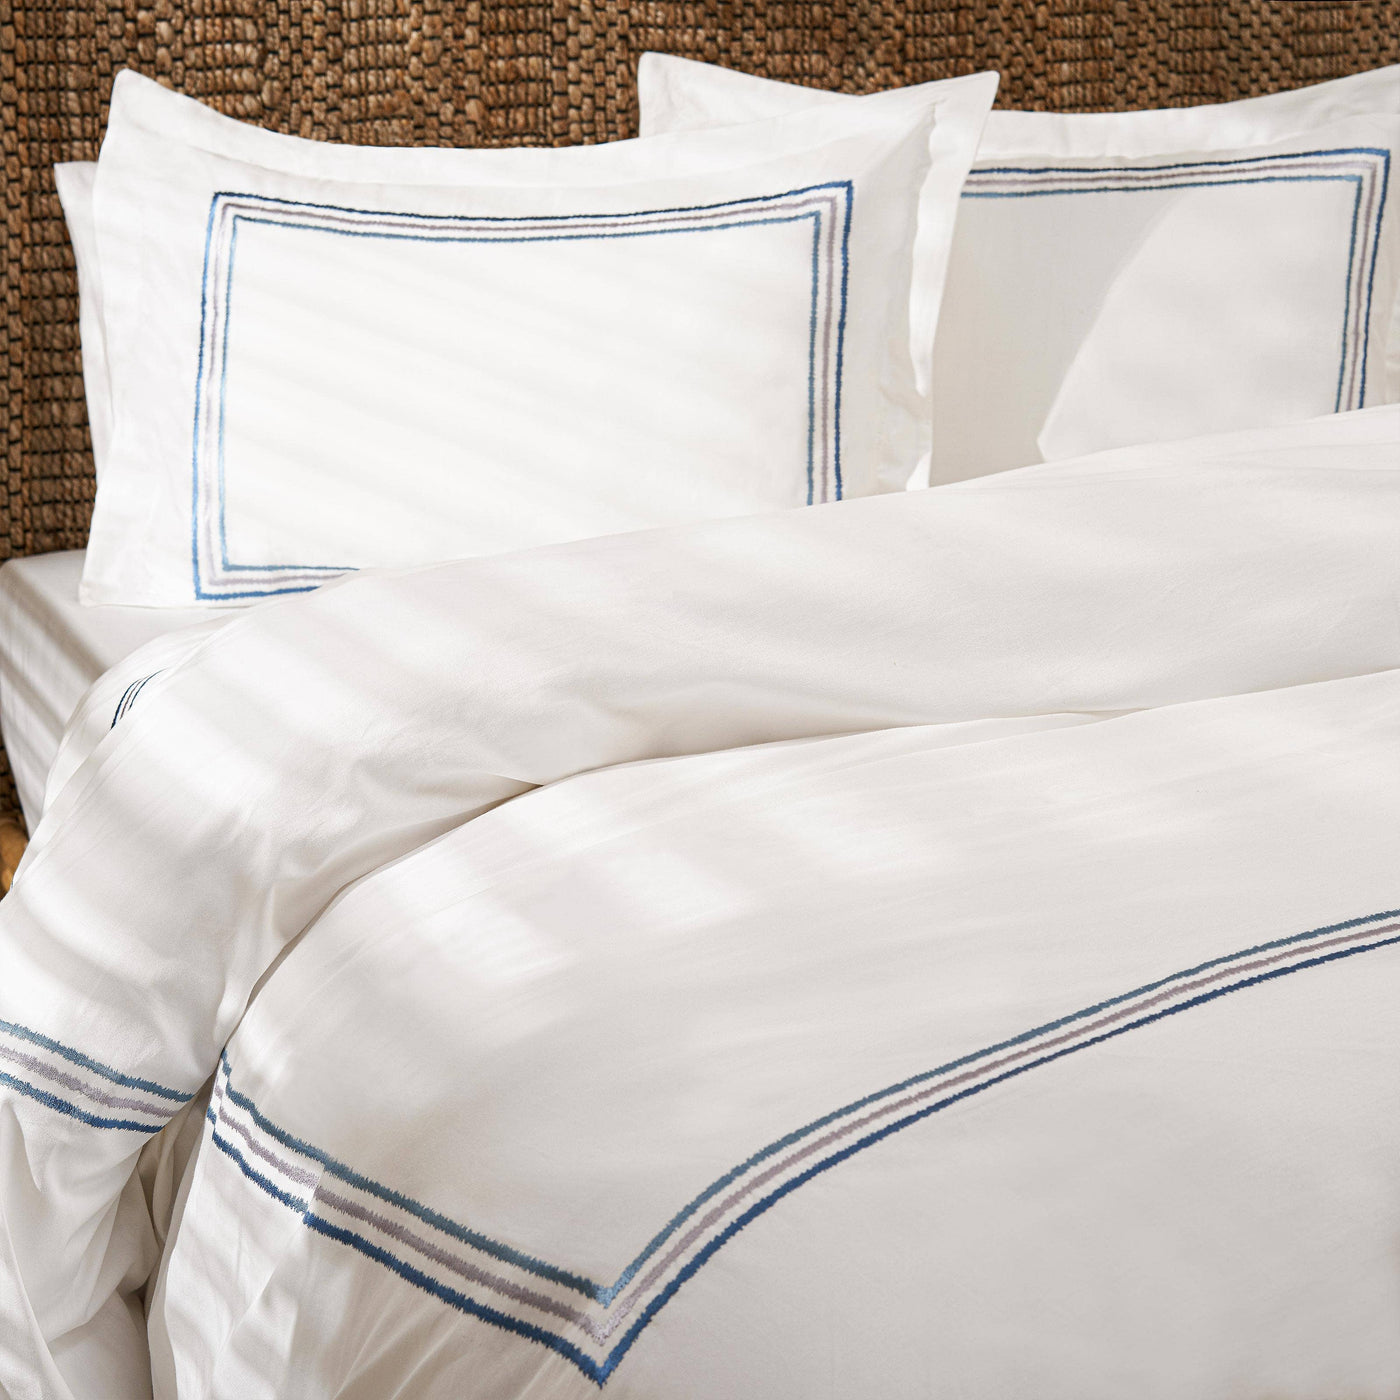 Darcy Embroidered 100% Turkish Cotton 210 TC Duvet Cover Set, White - Blue, Super King Size 1